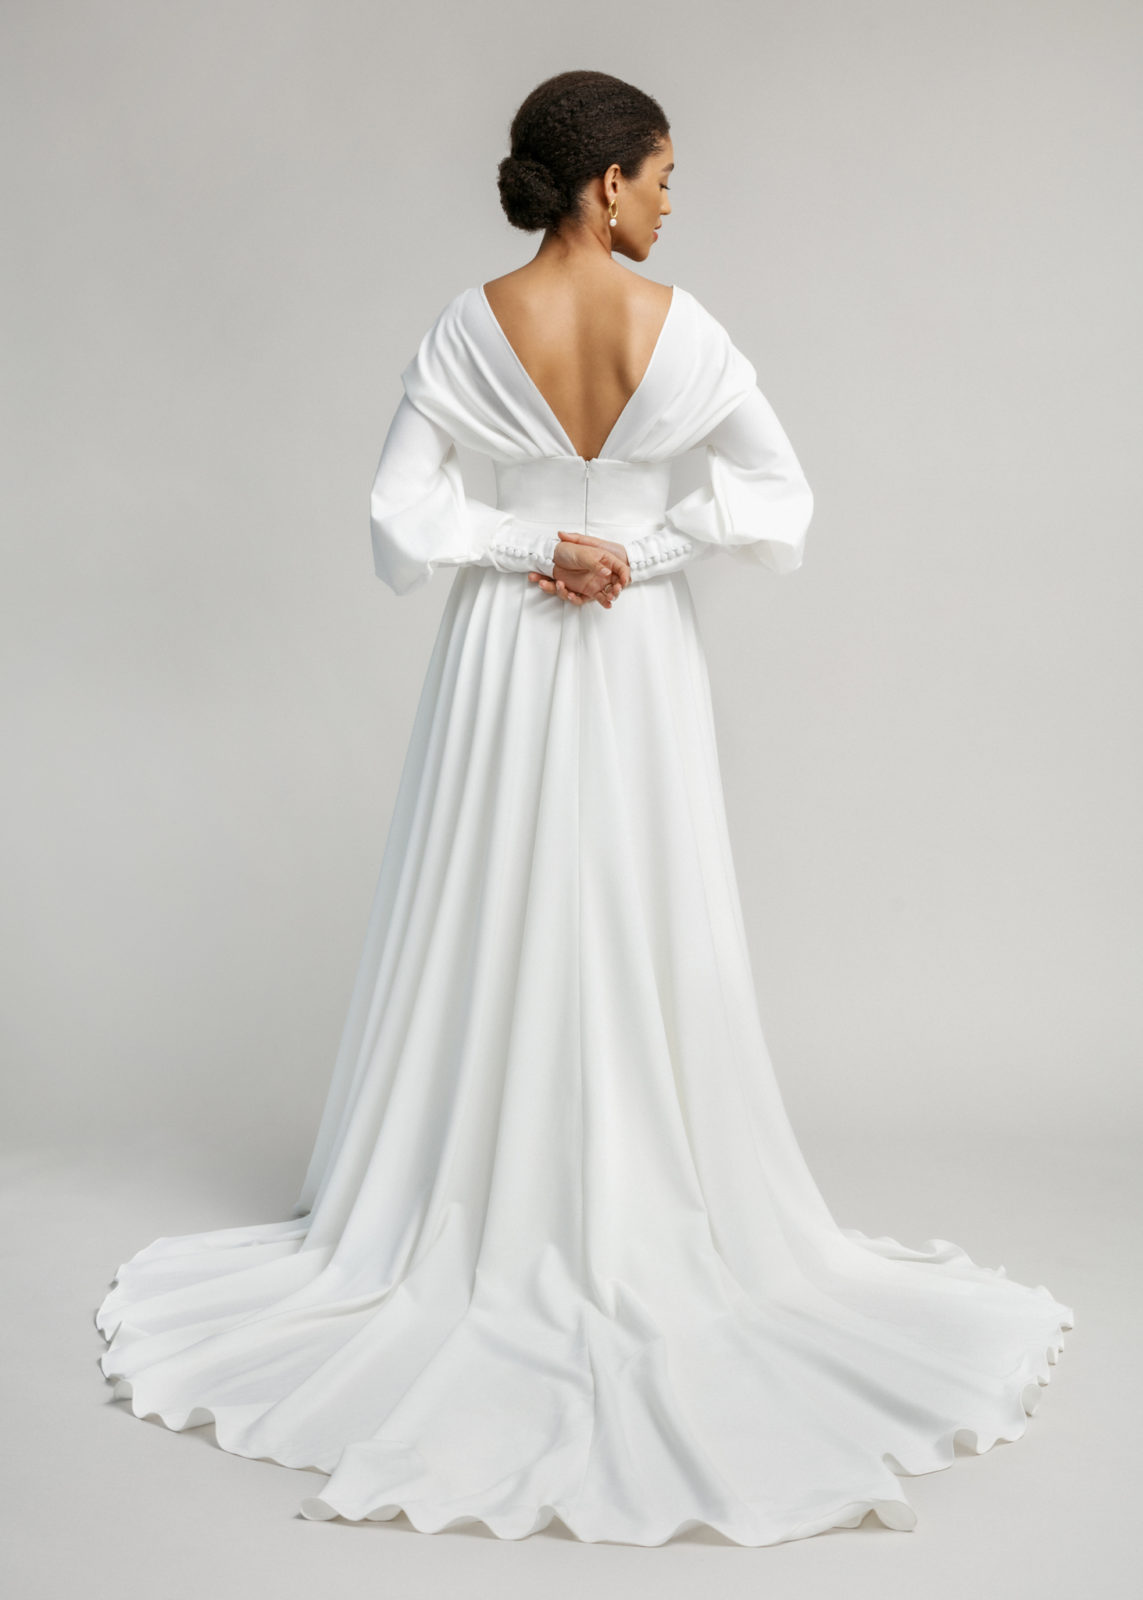 Bridal attire from Vancouver designer Aesling, Favourite Canadian bridal designer Aesling